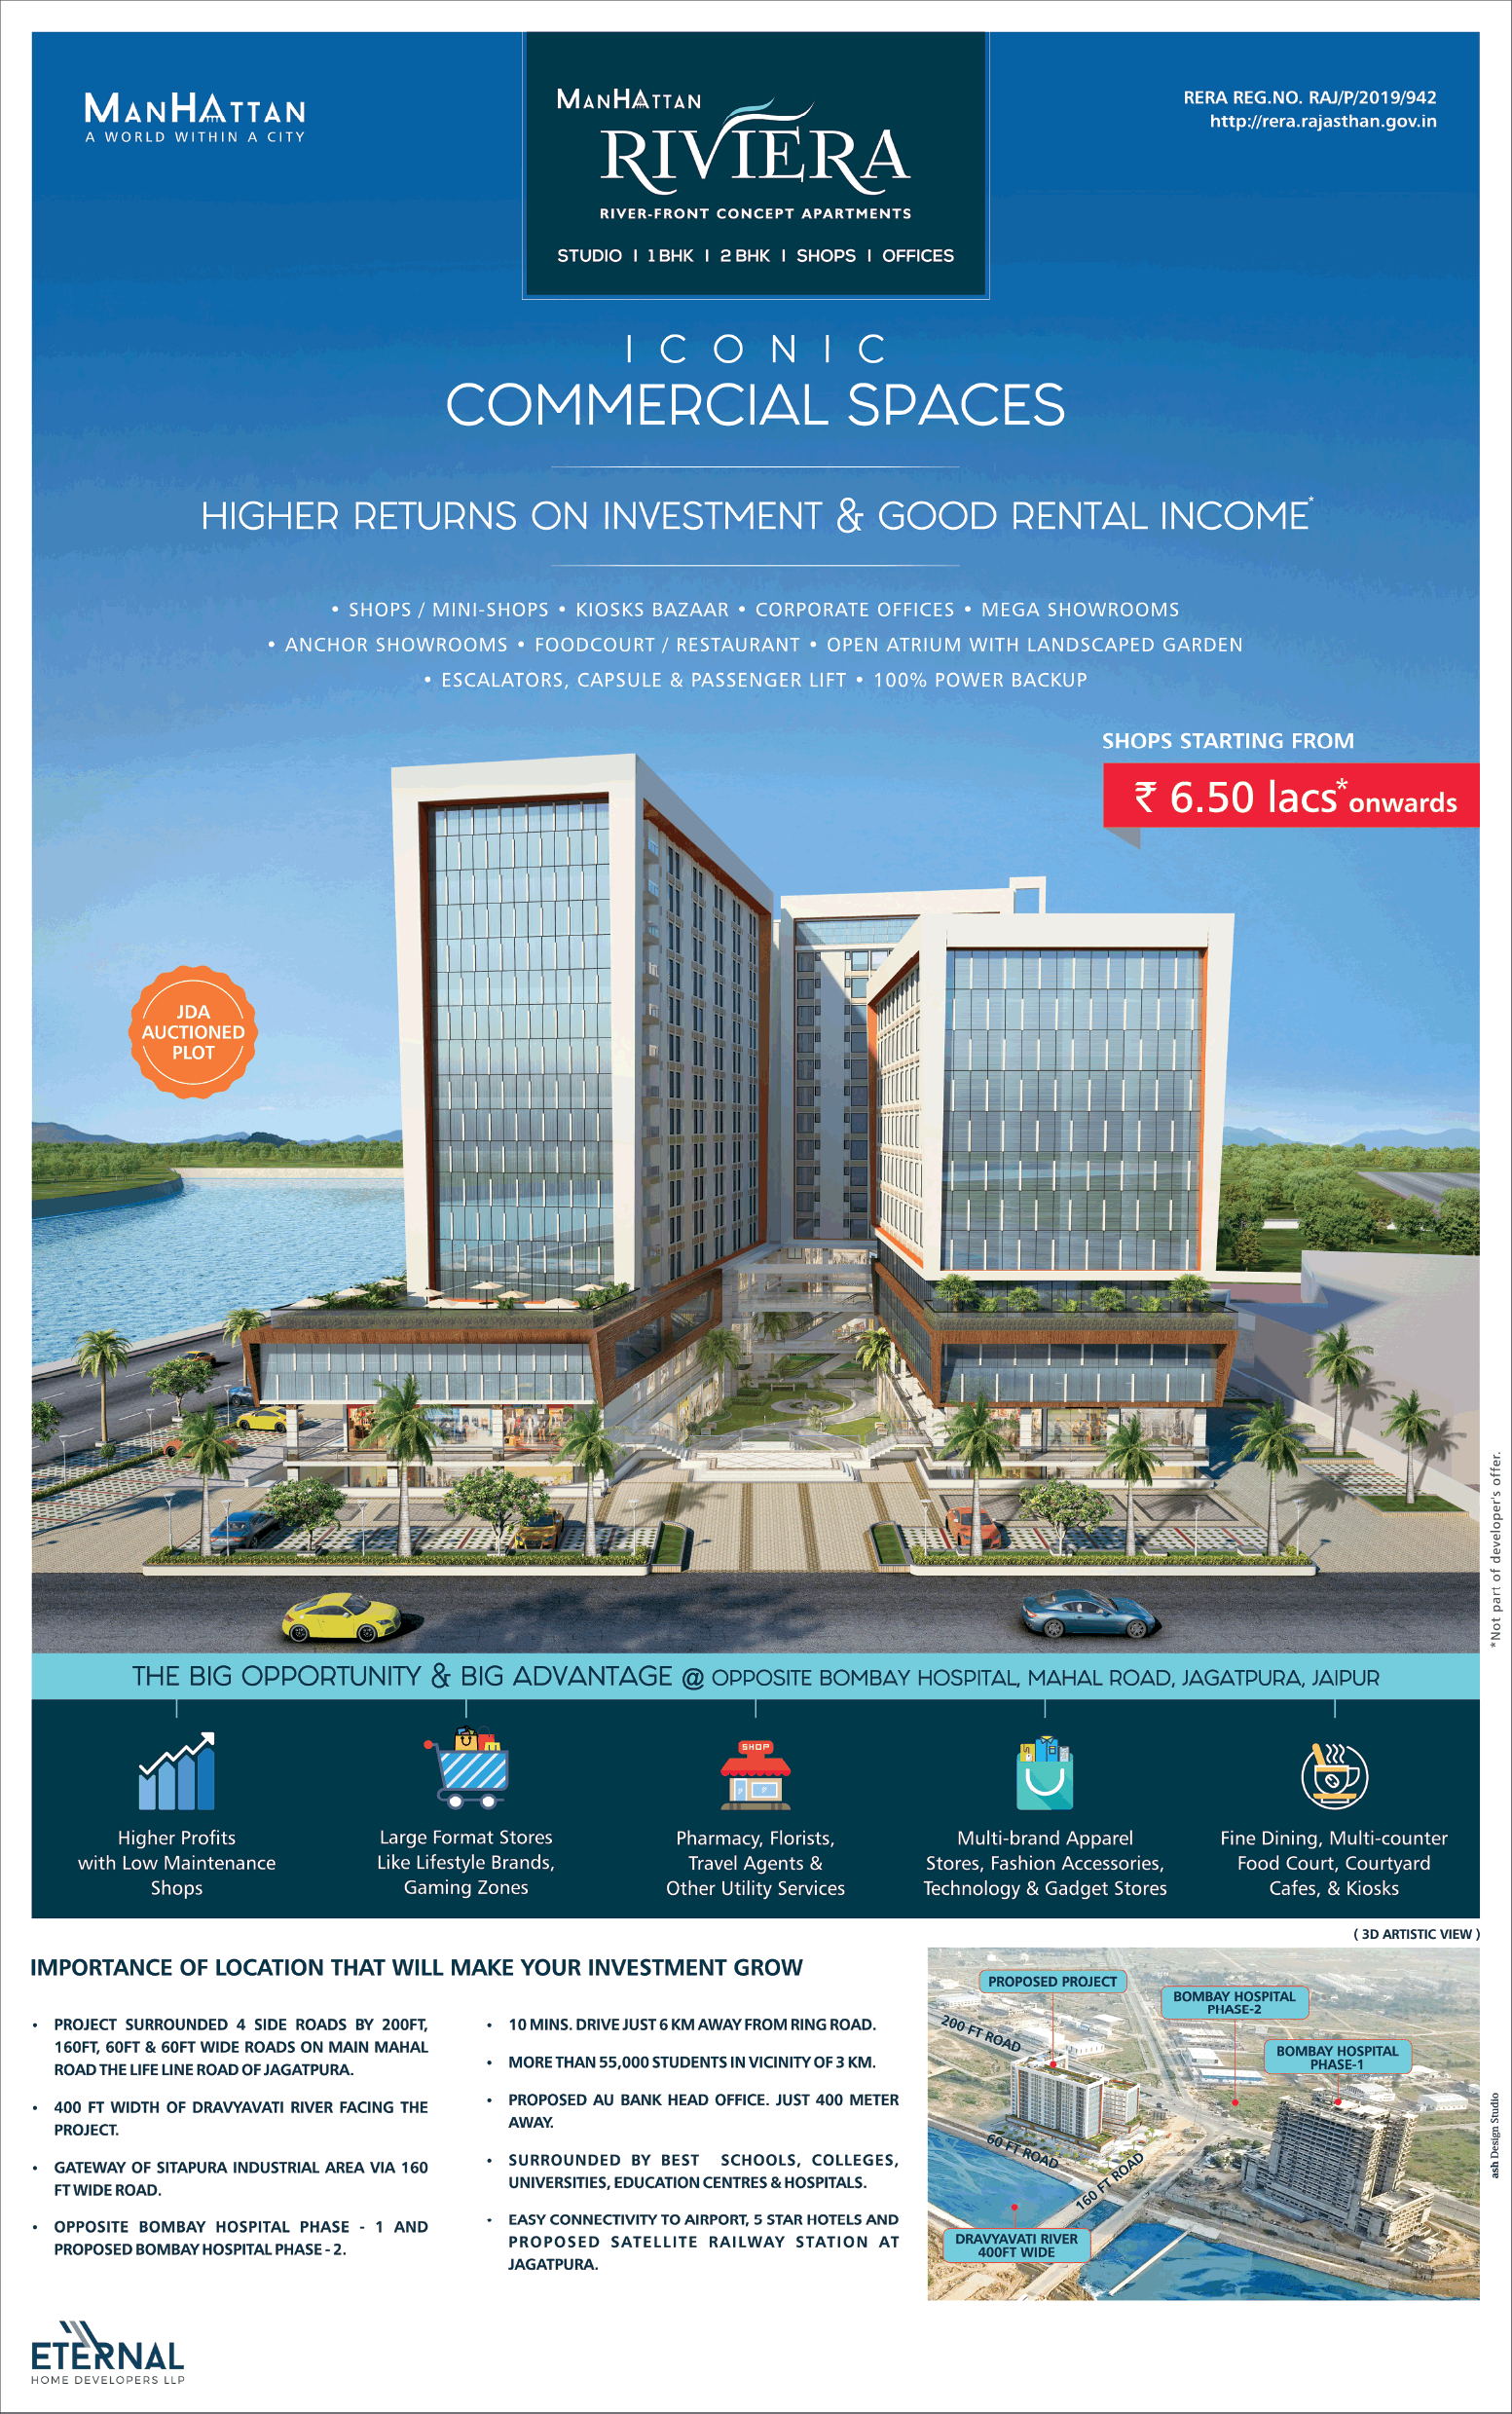 Avail higher returns on investments & good rental income at Manhattan Rivera in Jaipur